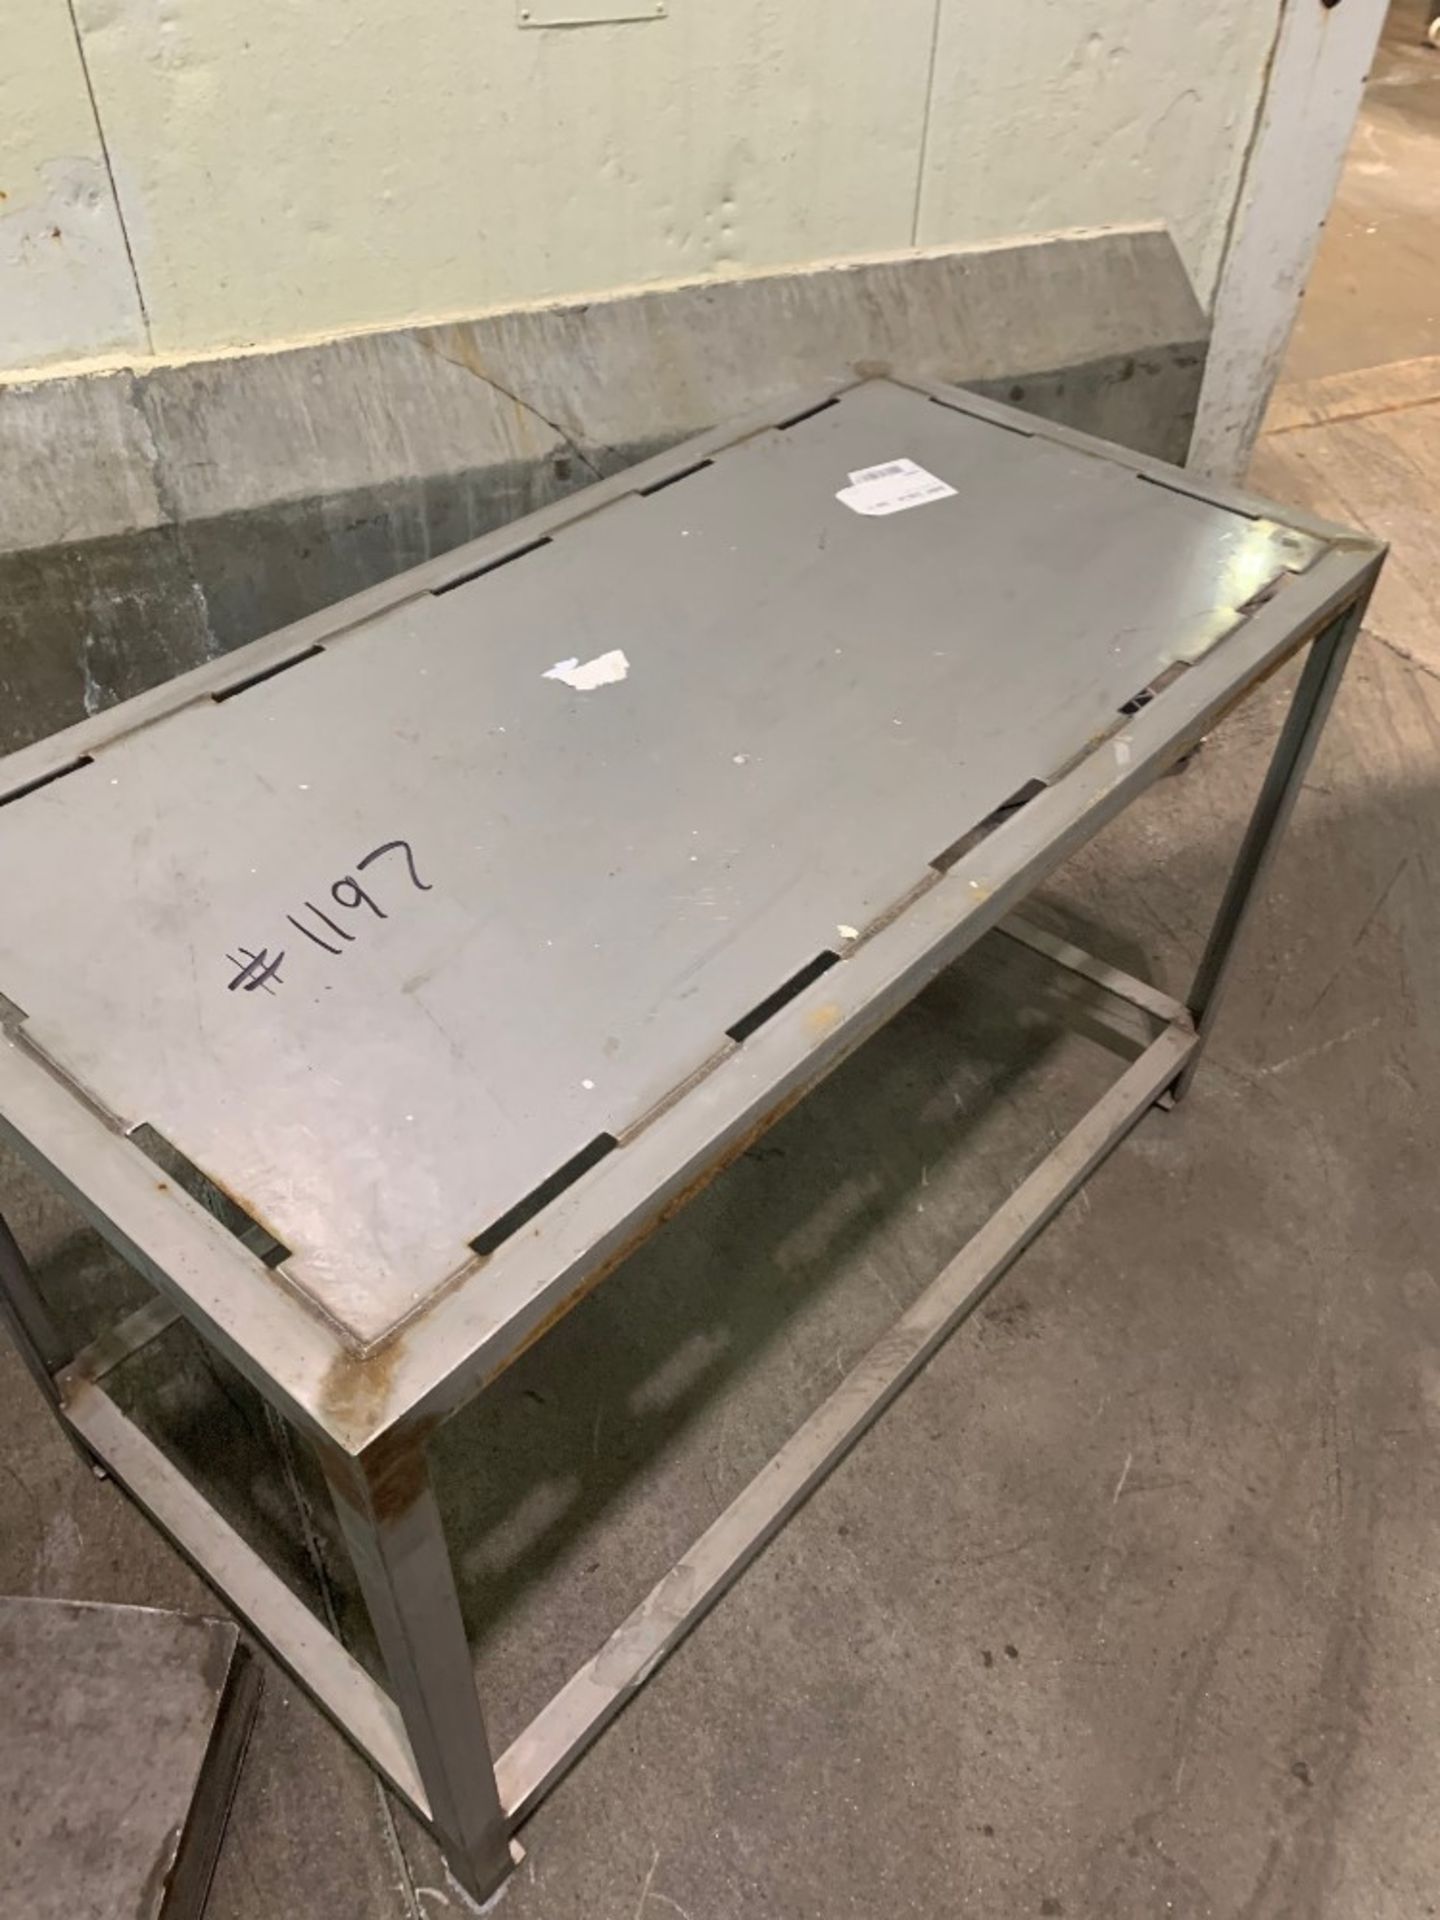 Lot Stainless Steel Parts Cart, (5) Stainless Steel Tables, Stainless Steel Cabinet, 6' Long - Image 8 of 9